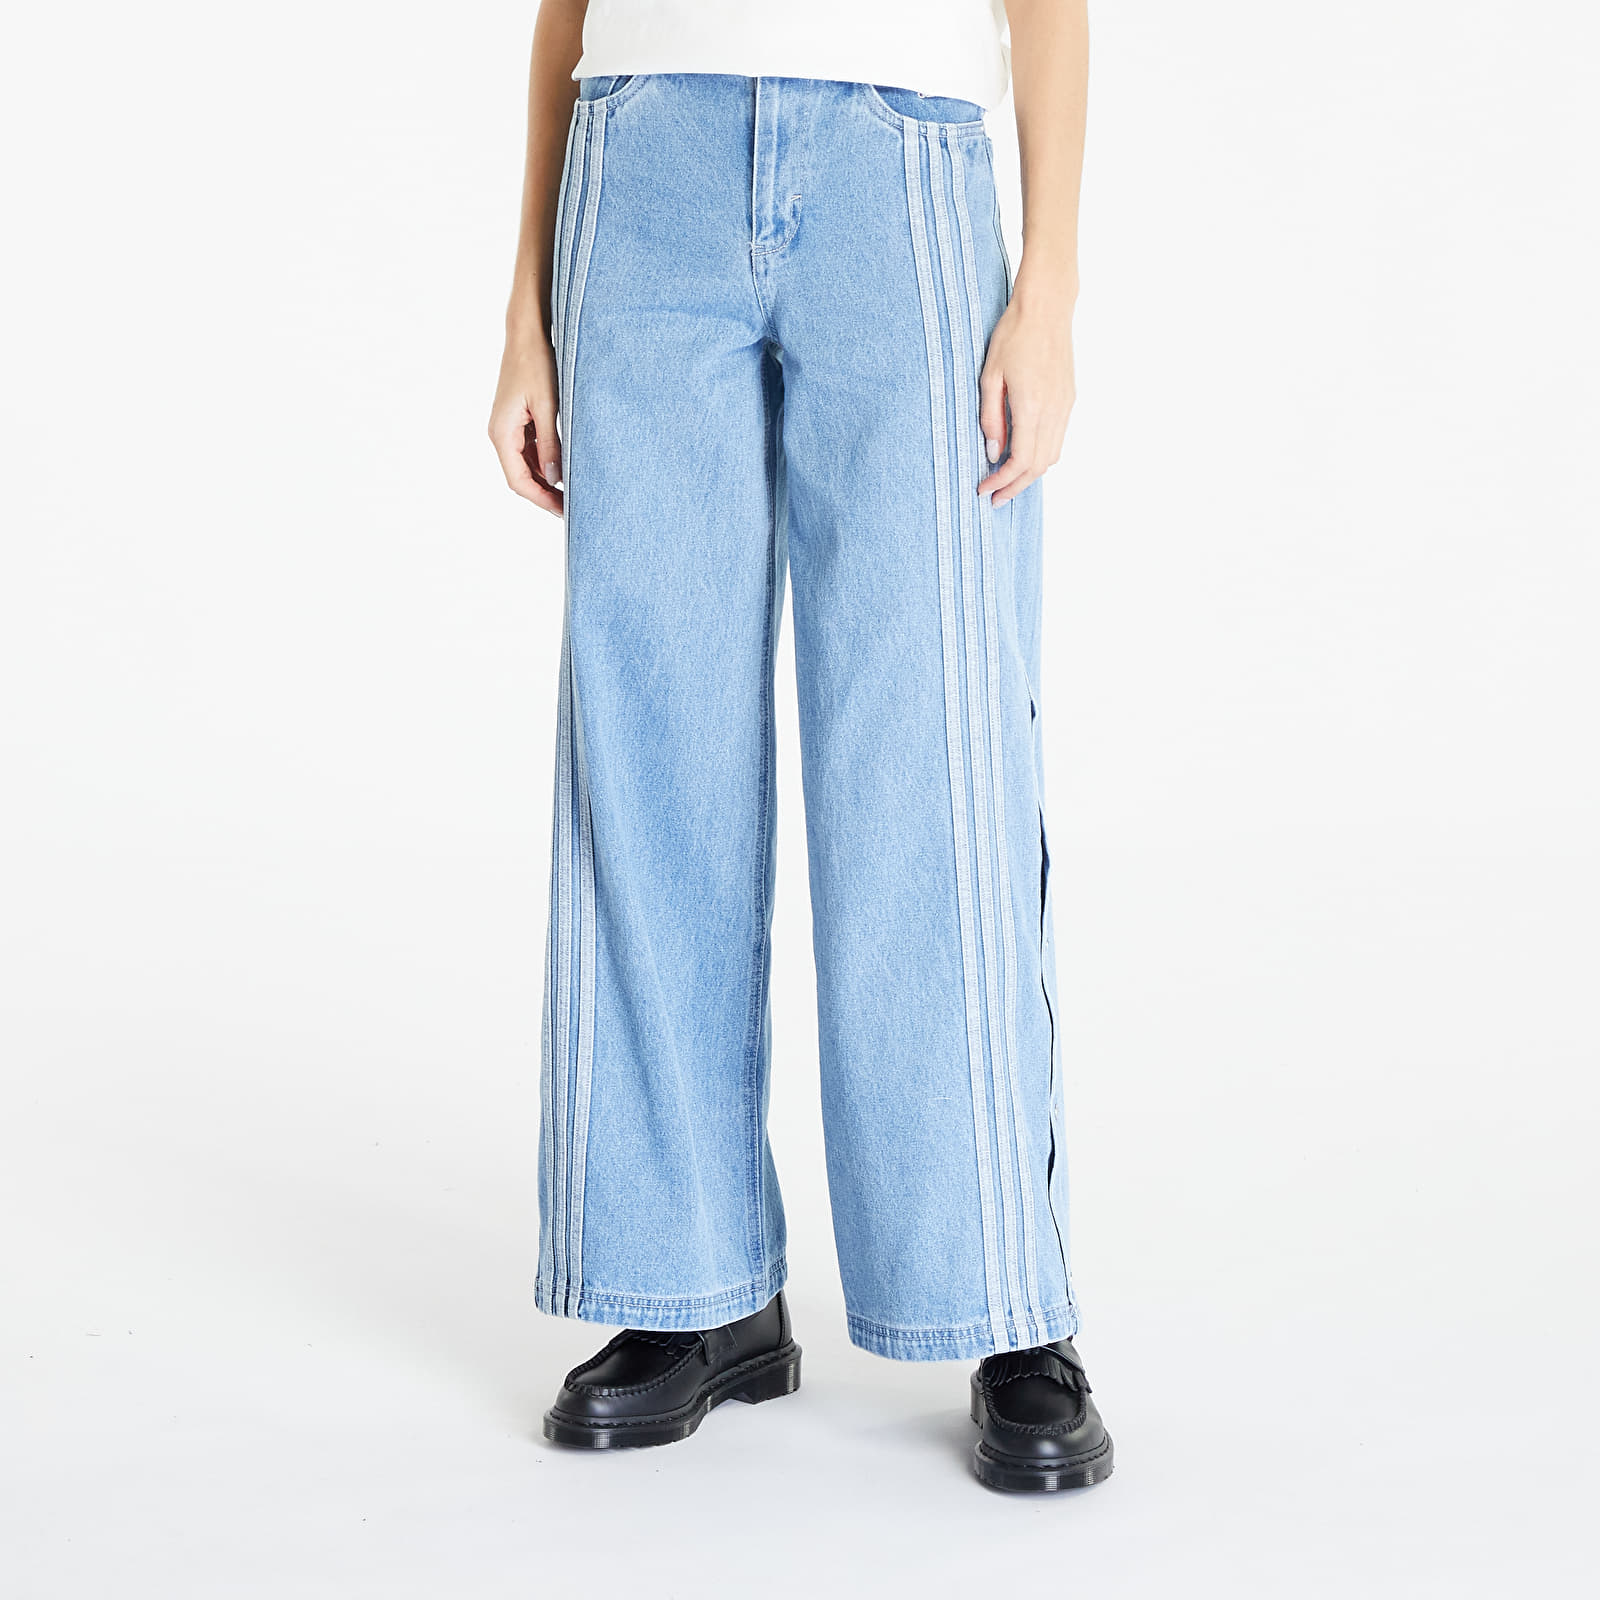 Pants and jeans adidas Denim Pant Clear Blue